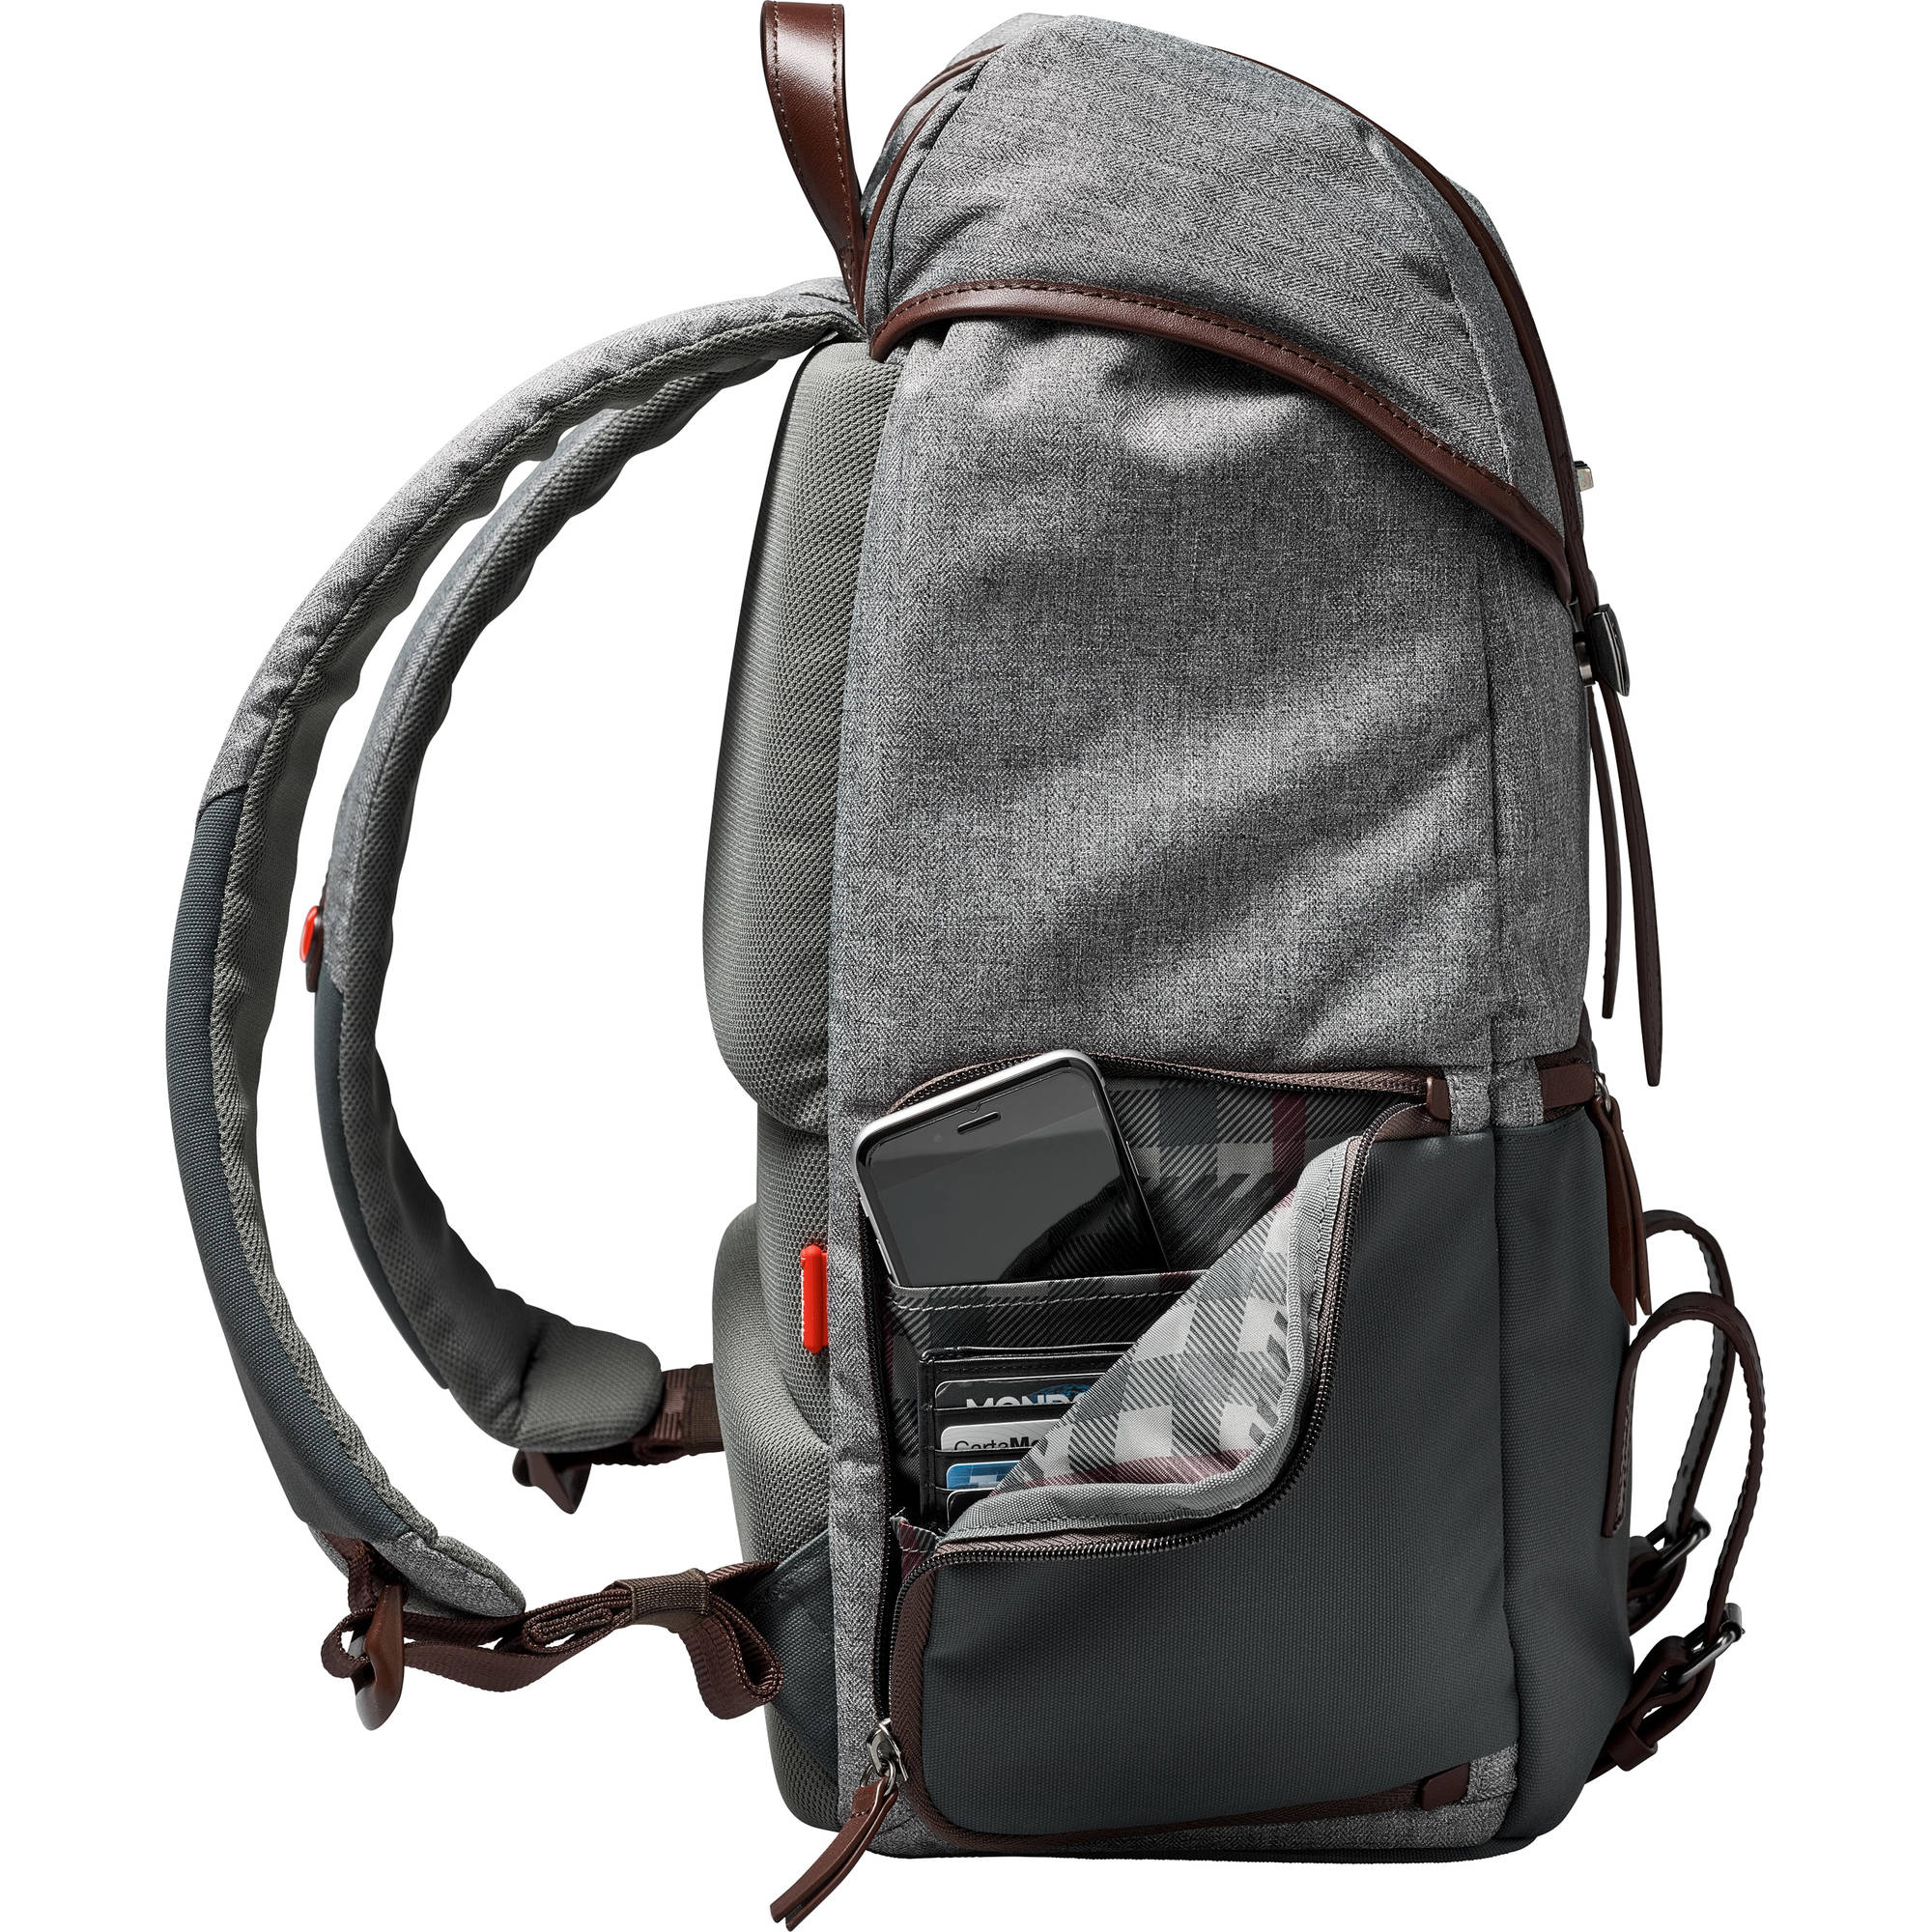 Manfrotto Windsor Camera and Laptop Backpack for DSLR (Gray)